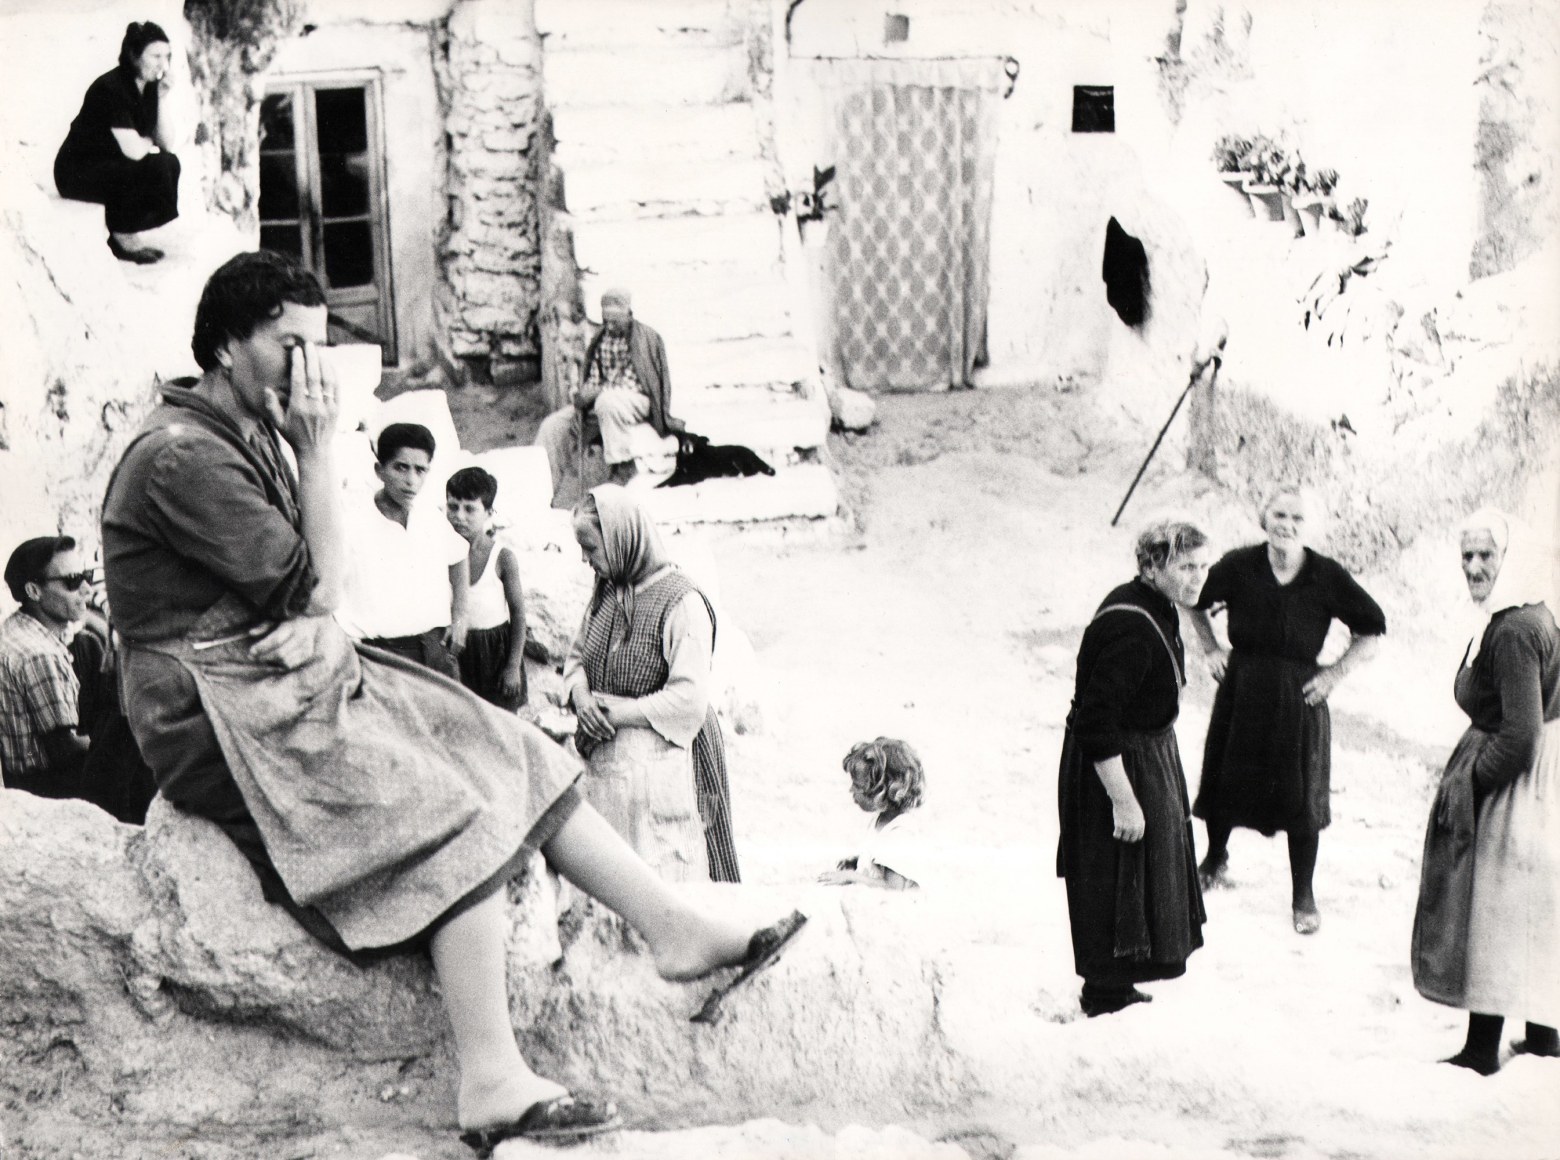 Mario Giacomelli, Puglia, ​1958/1970. High-contrast street scene with various people sitting and standing in groups.